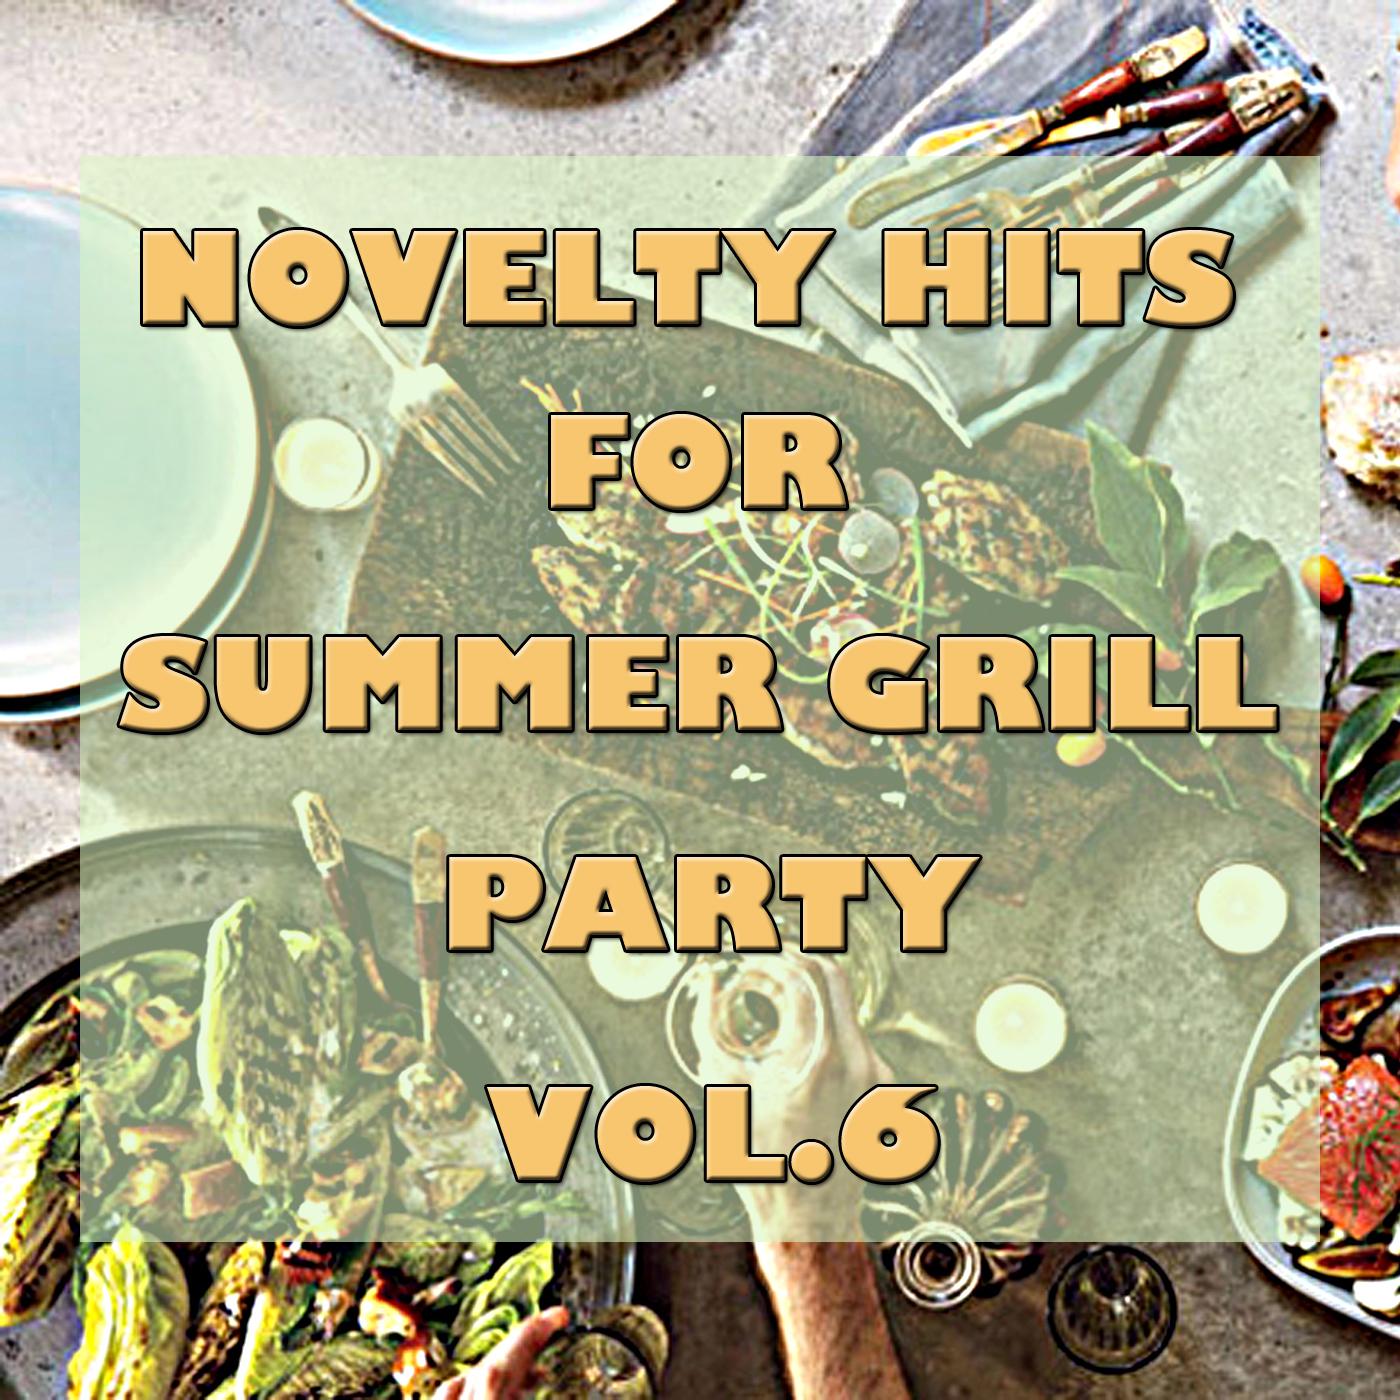 Novelty Hits For Summer Grill Party, Vol.6